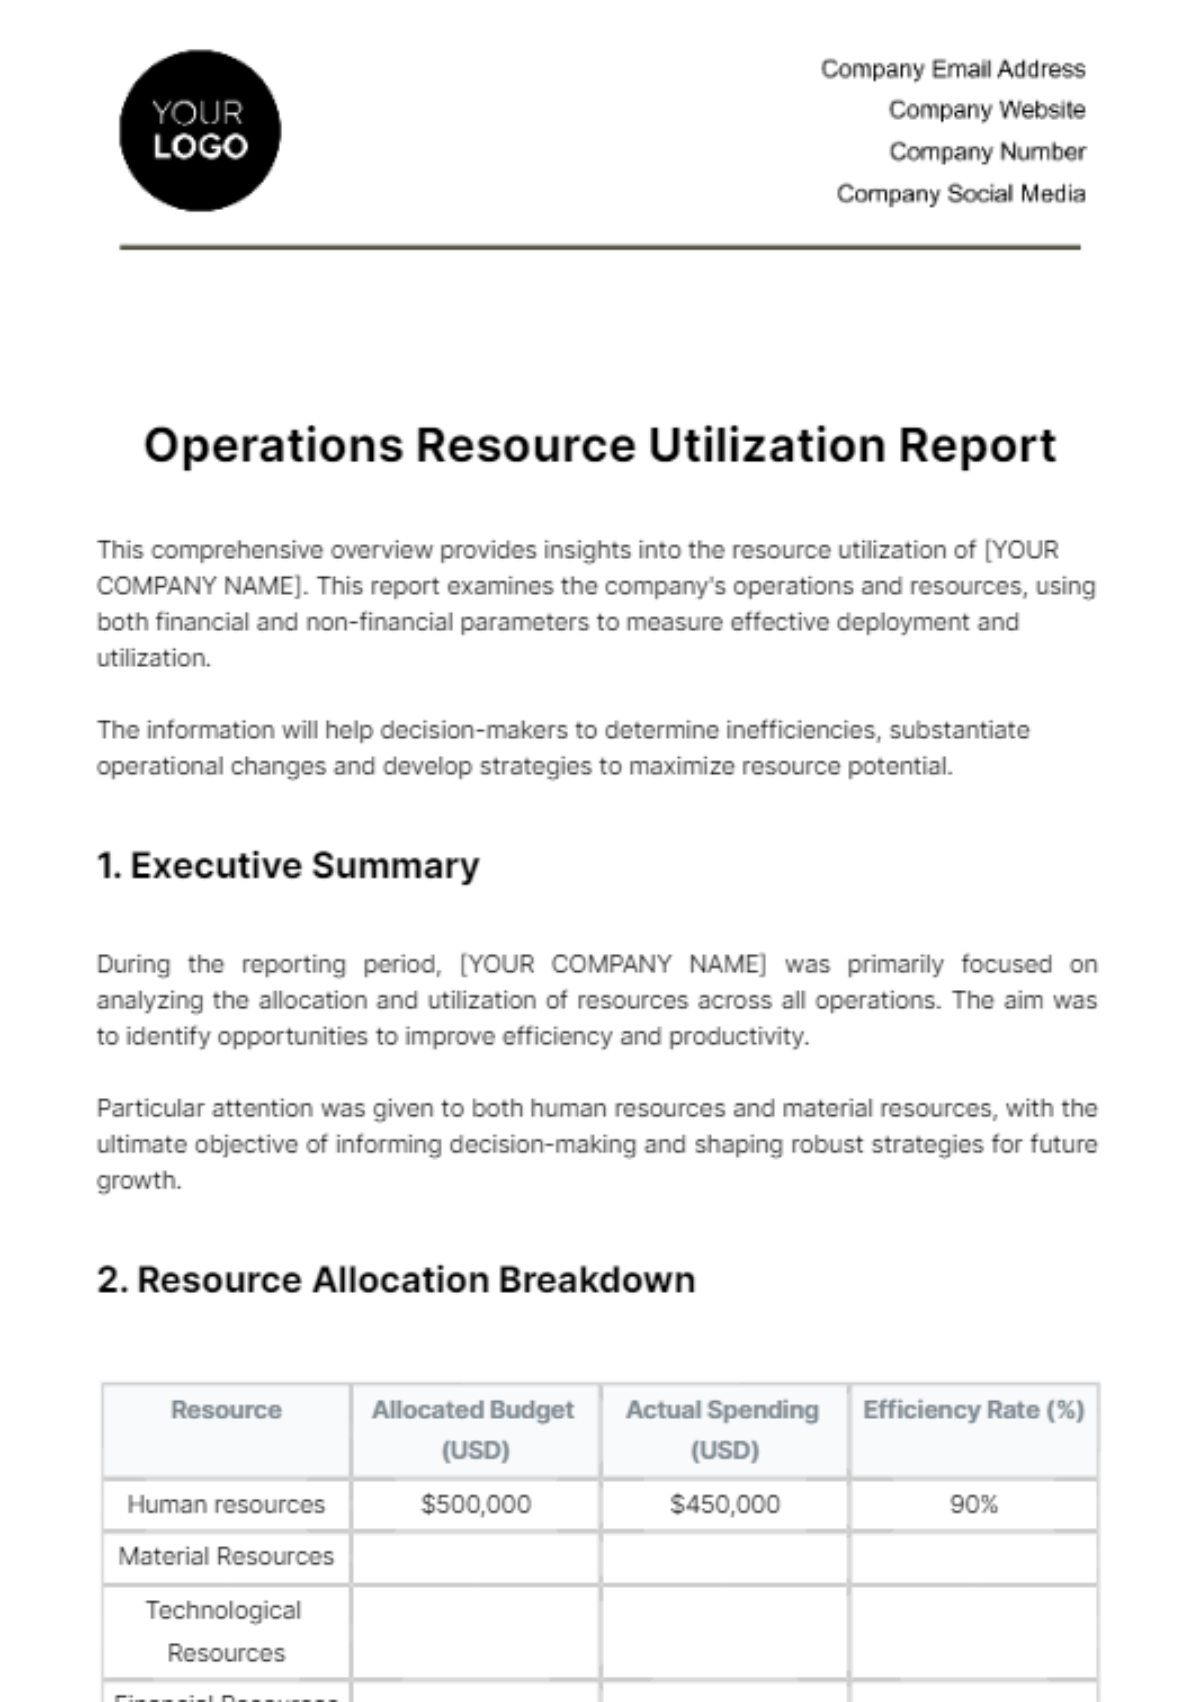 Free Operations Resource Utilization Report Template